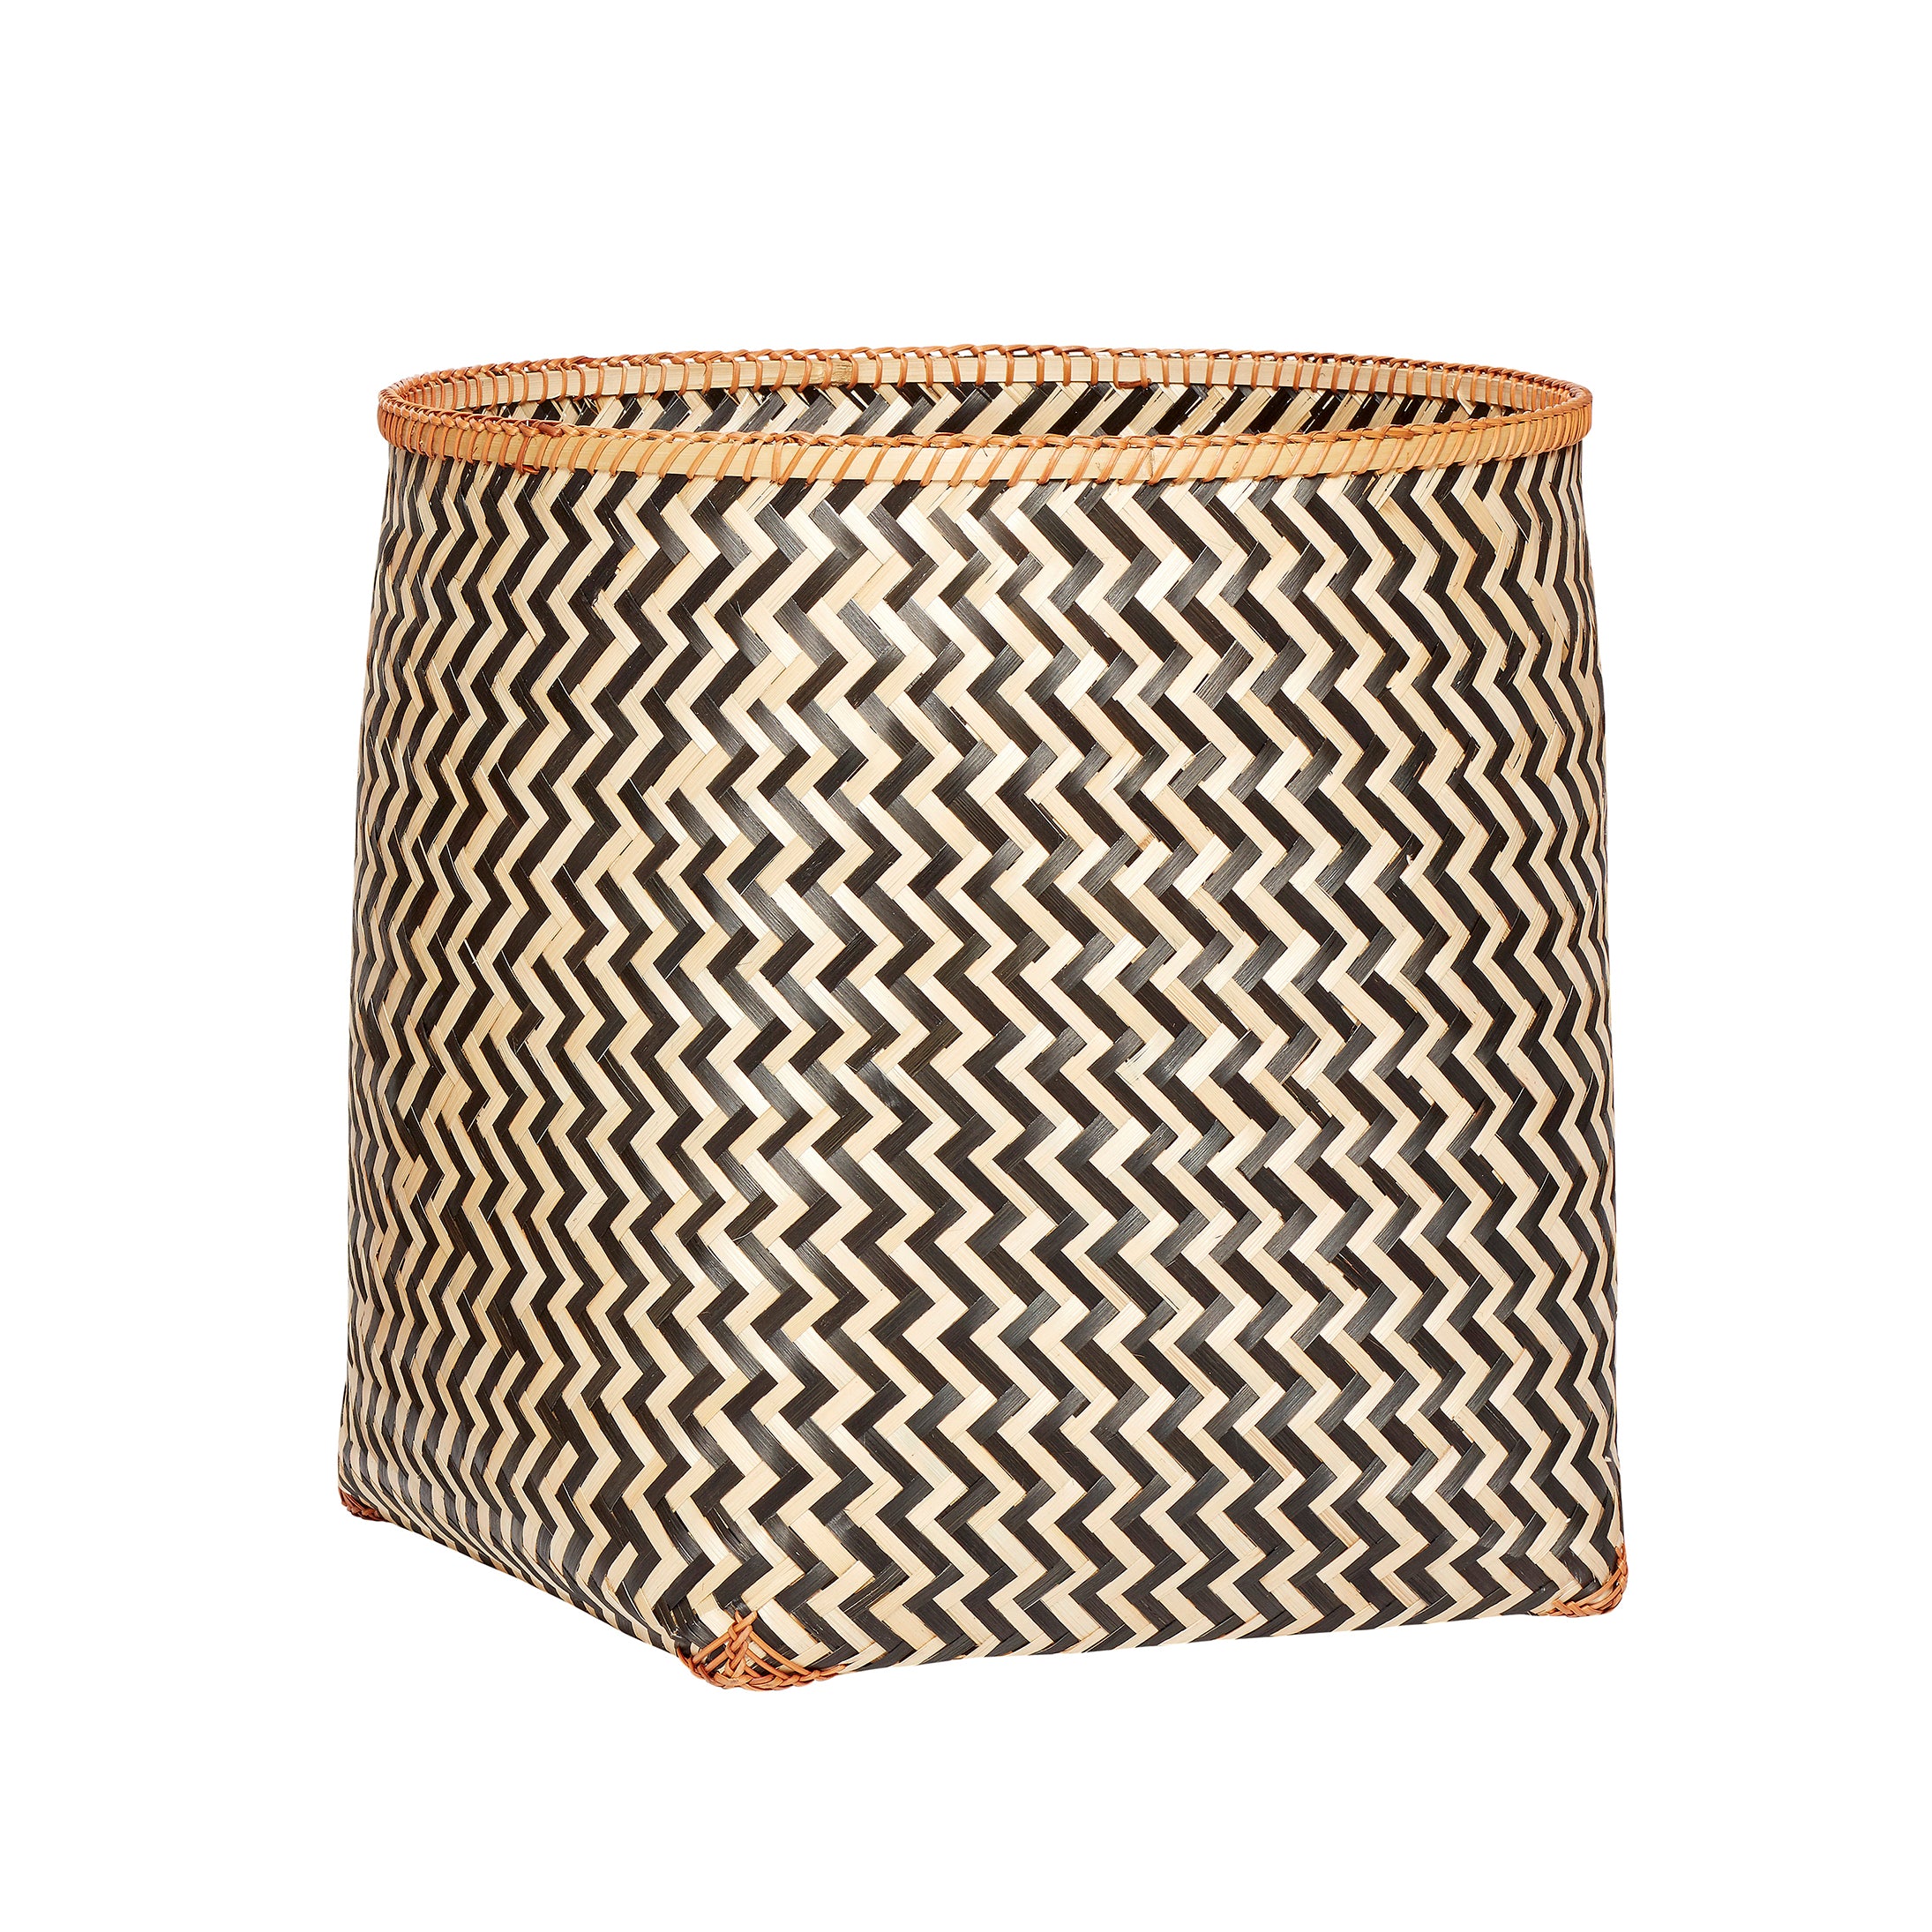 Round Bamboo Basket with Black Zig Zag Pattern in Large